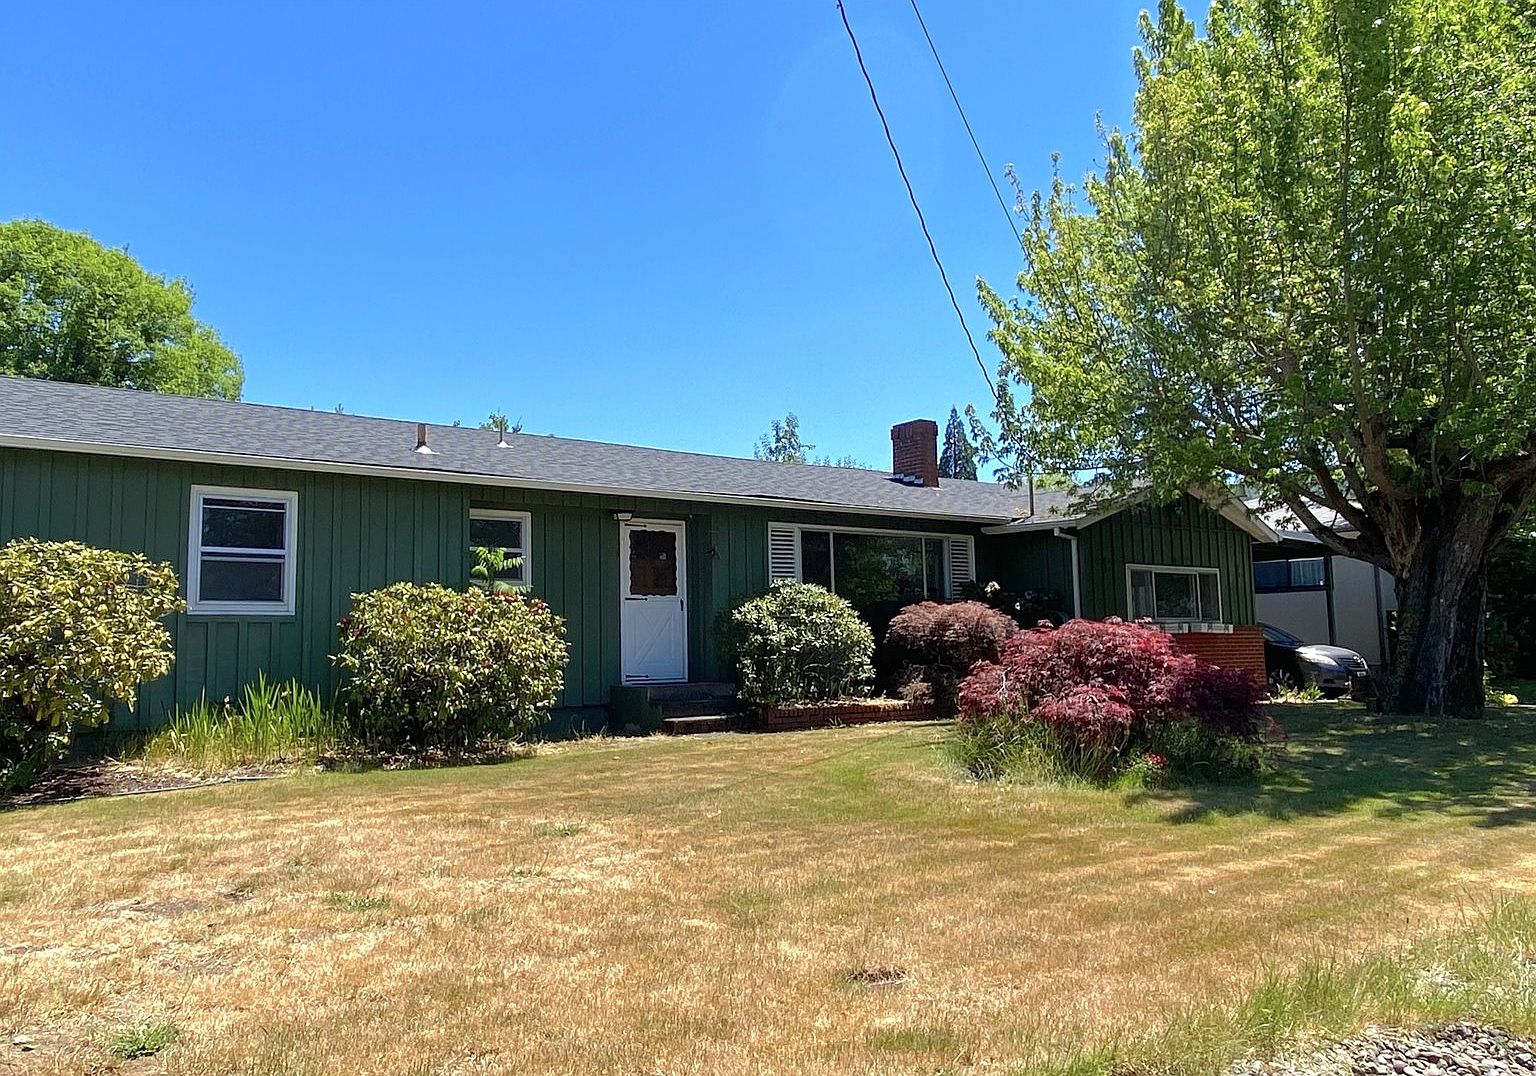 175 W Tanager St, OR 97471 | MLS #21518630 |